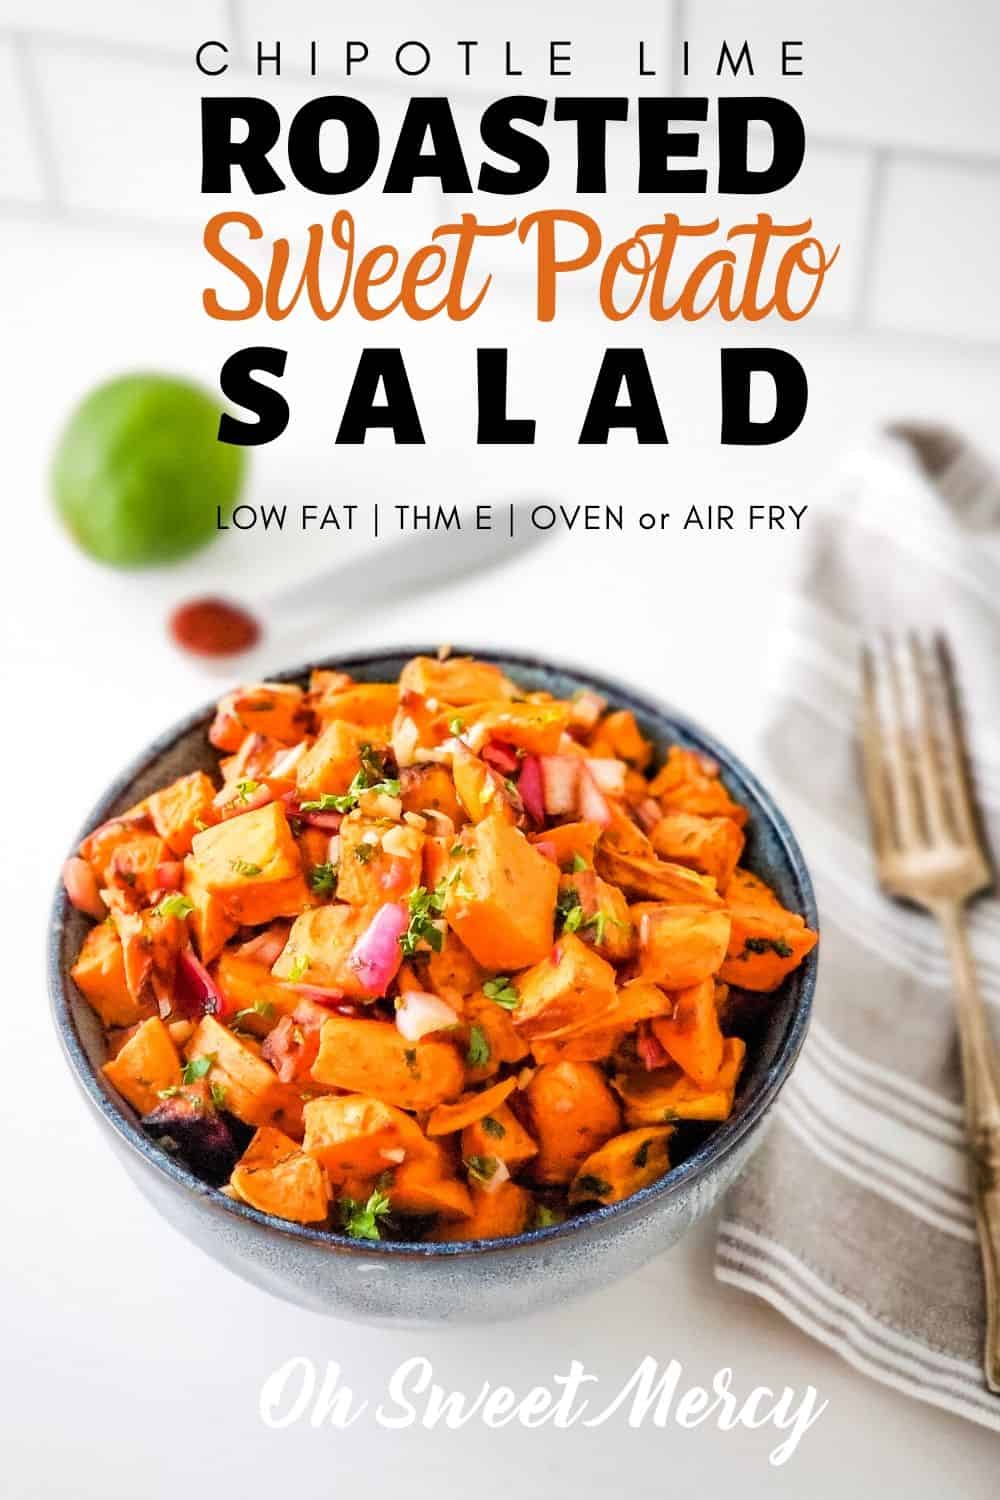 Sweet, tangy, with a bit of smoky heat this easy Chipotle Lime Sweet Potato Salad is the perfect side for a low fat THM E meal. Perfect with grilled chicken or fish! #lowfat #thmsidedishes #sweetpotatoes #thmrecipes